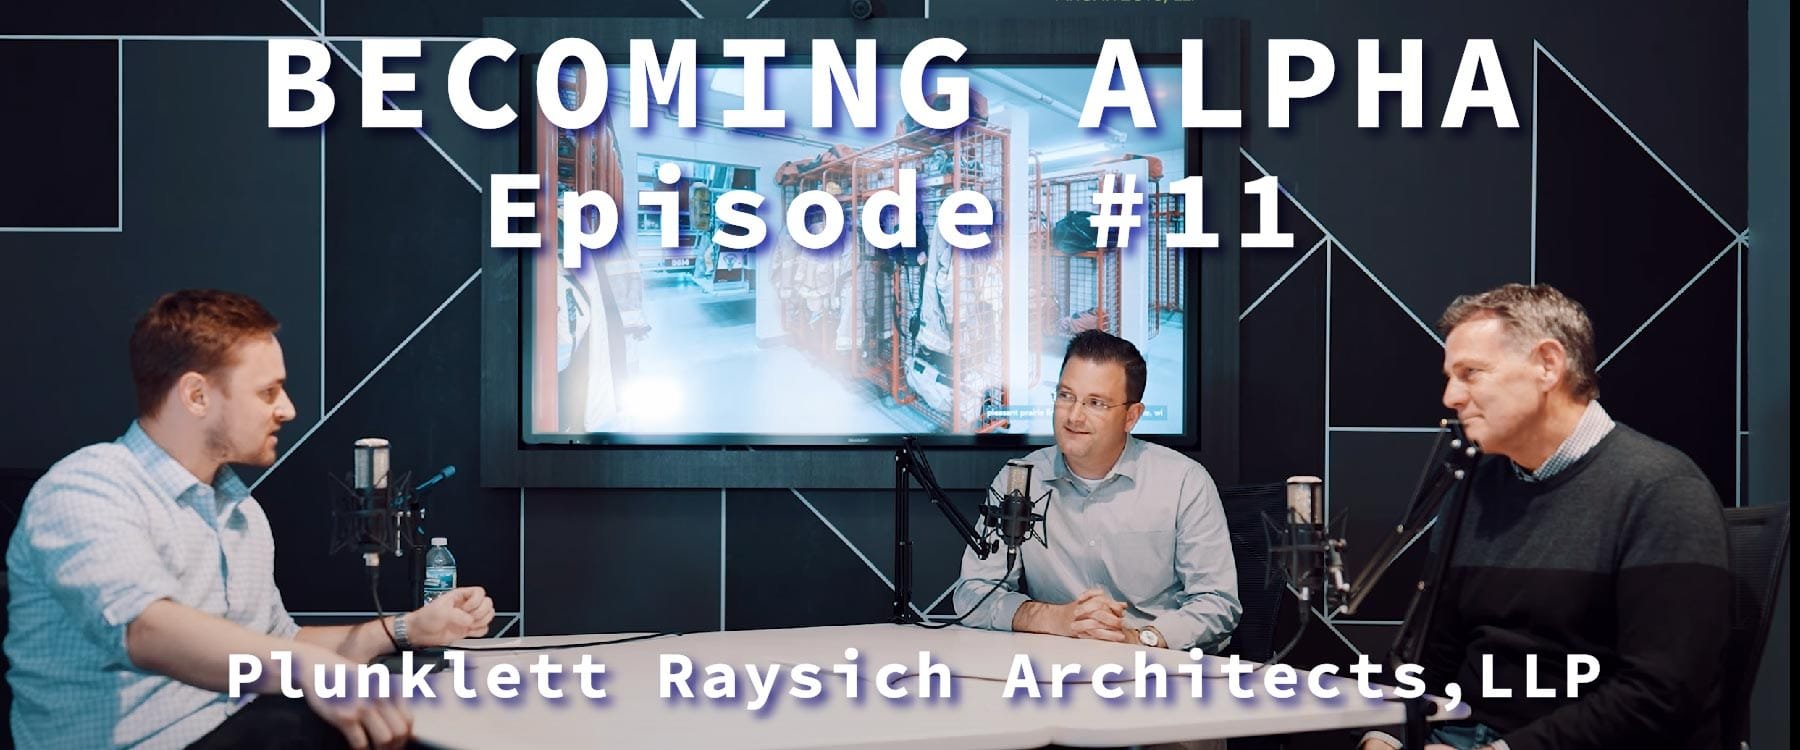 Larry Schneider and Nick Kent interview with Alpha Pro on what it means to be an architect and how to become one